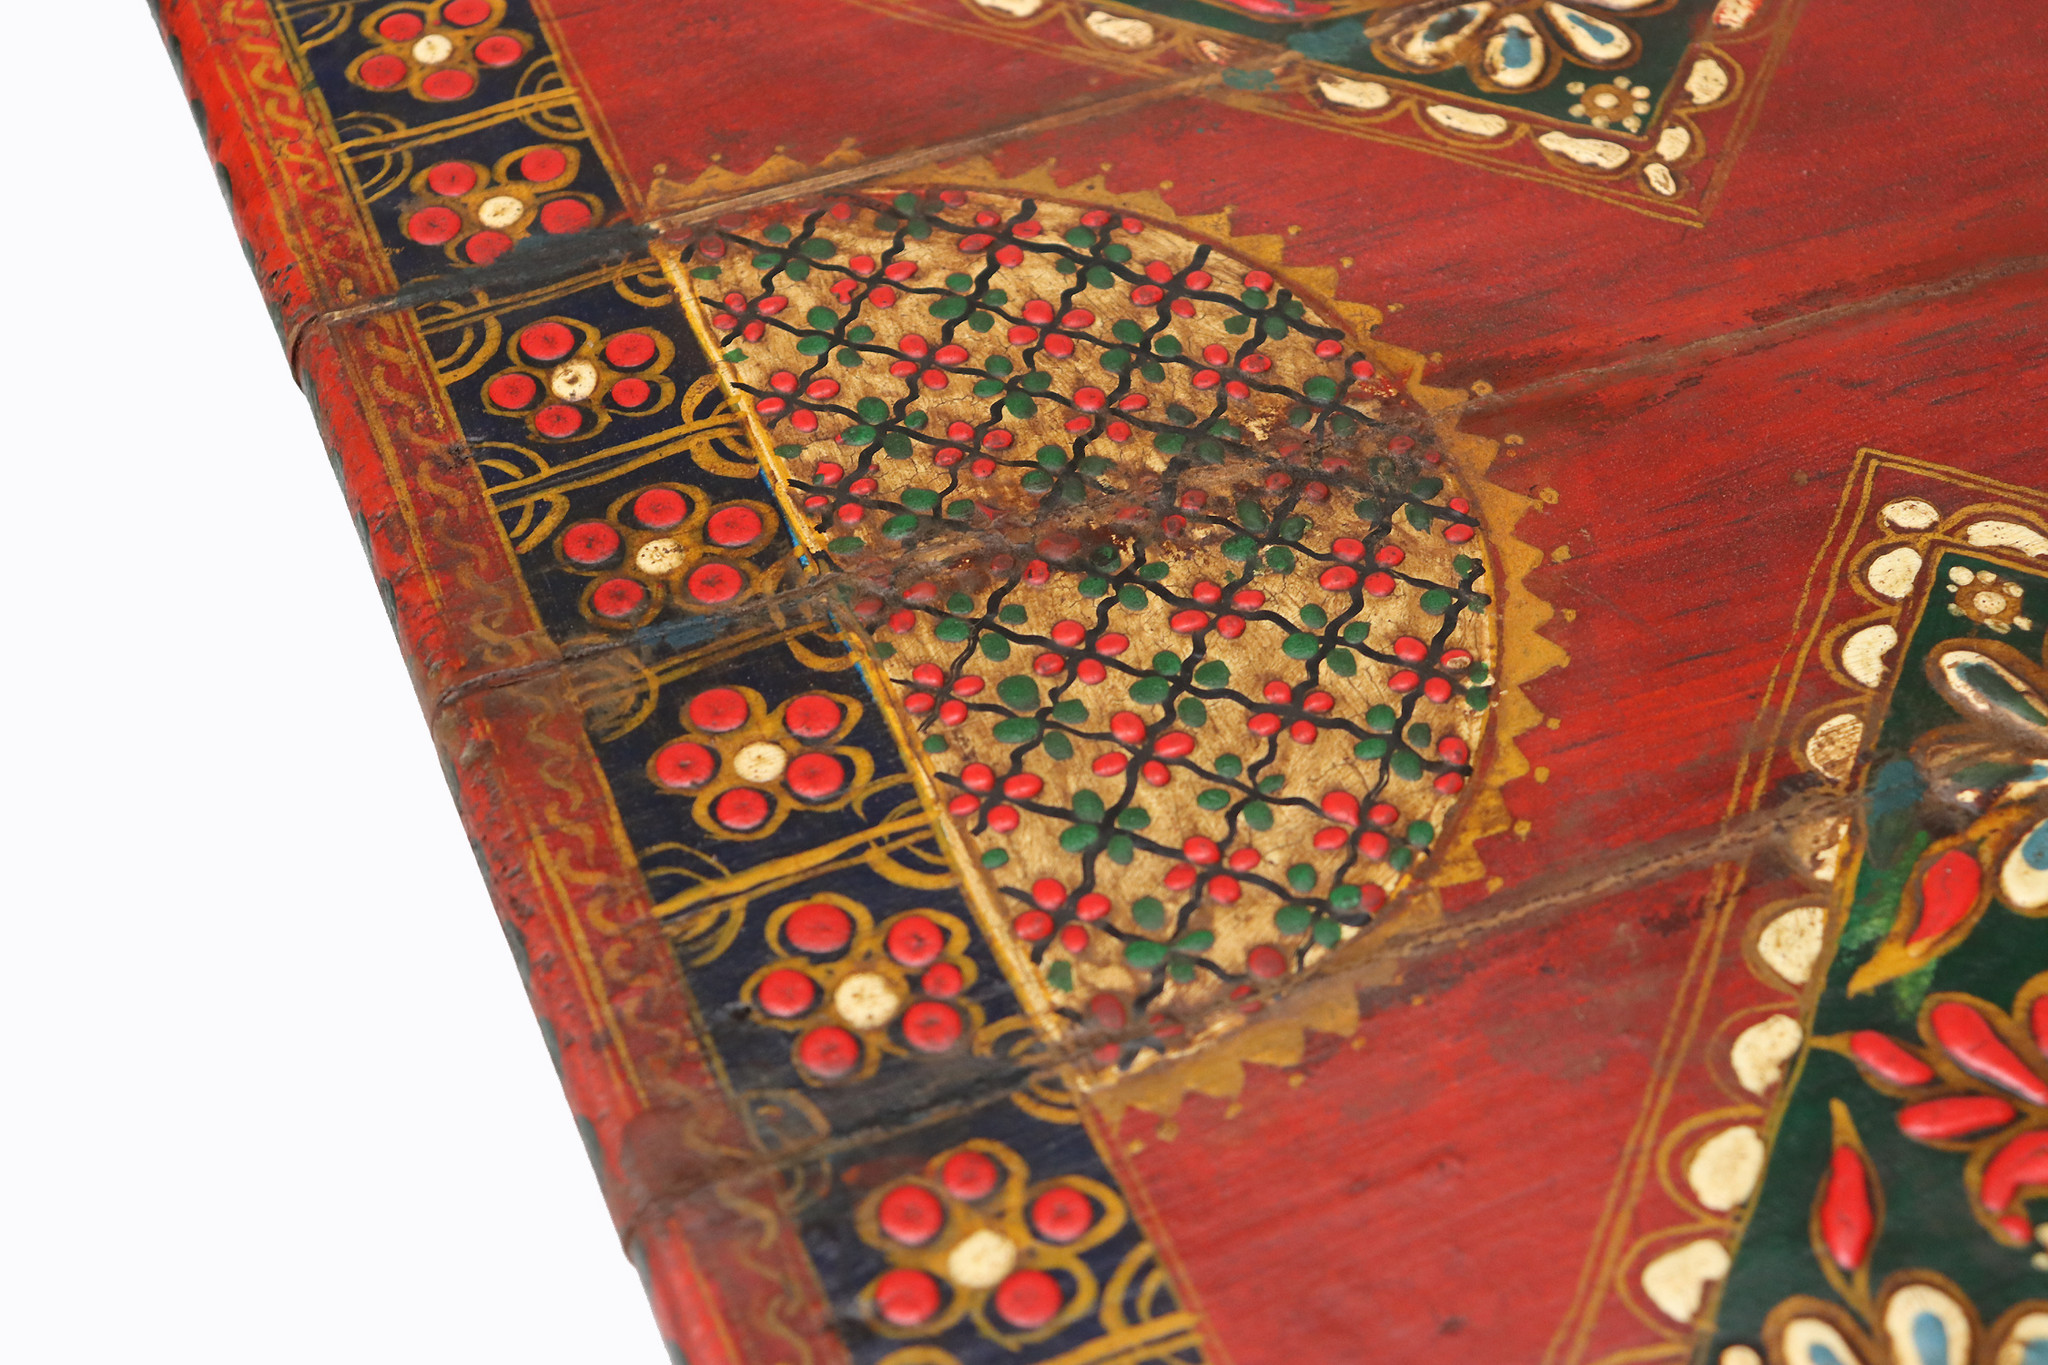 80x80 cm orient vintage hand painted  low tea table Coffee side Table from Afghanistan 22/C